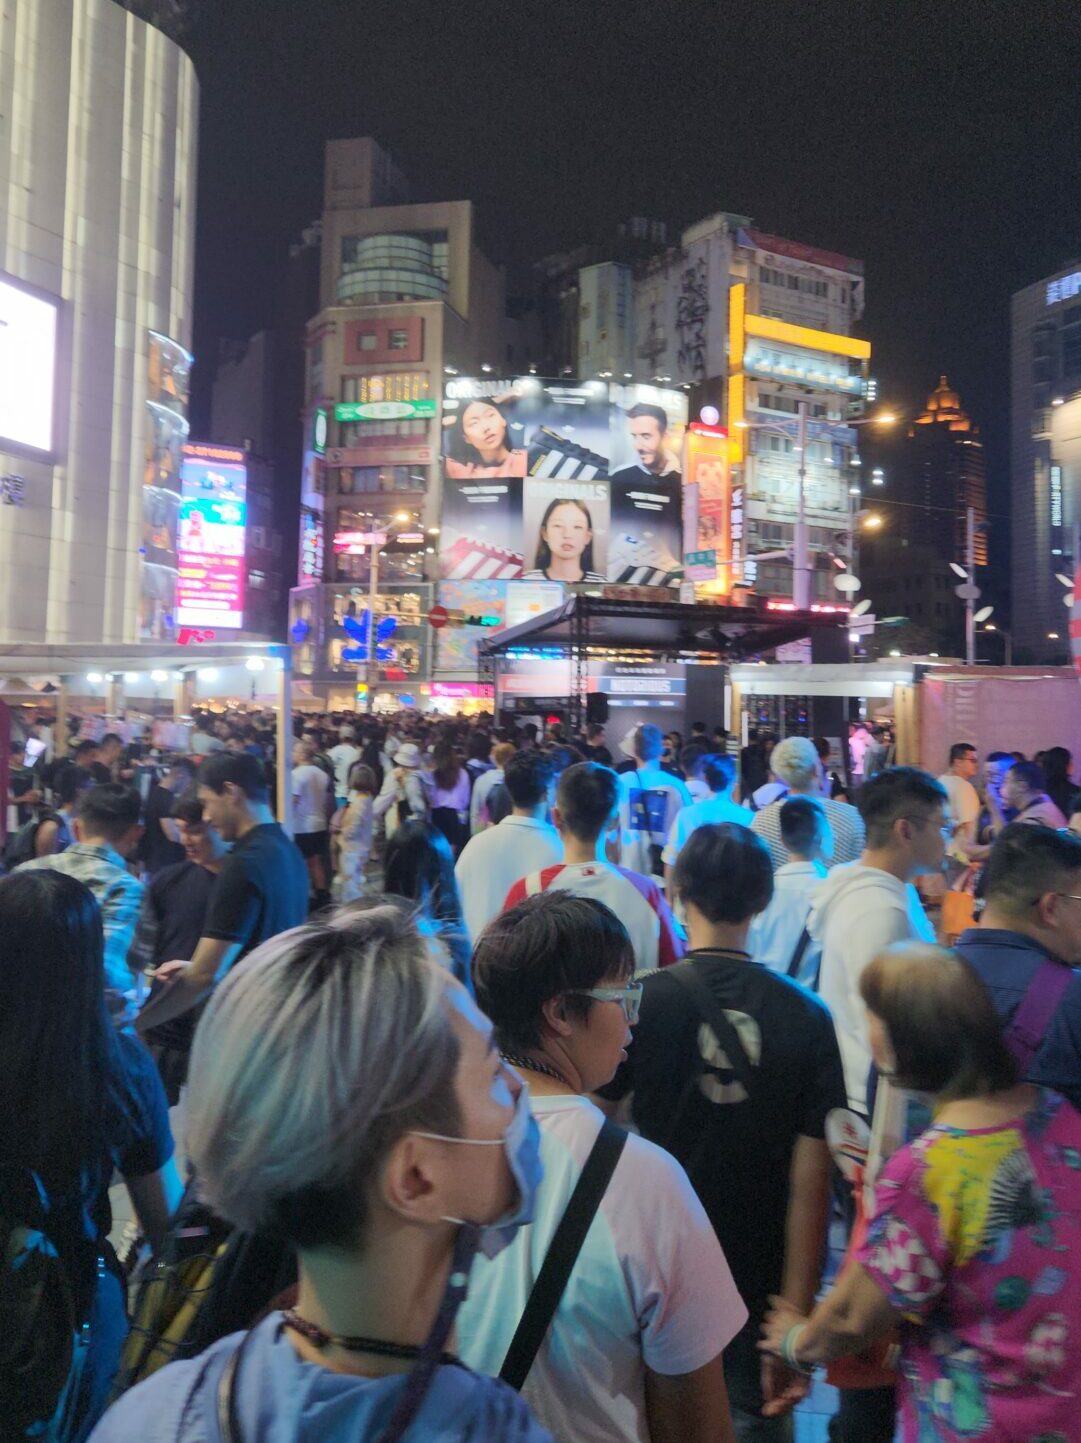 Crowds attend the Trans March event with skyscrapers in the background